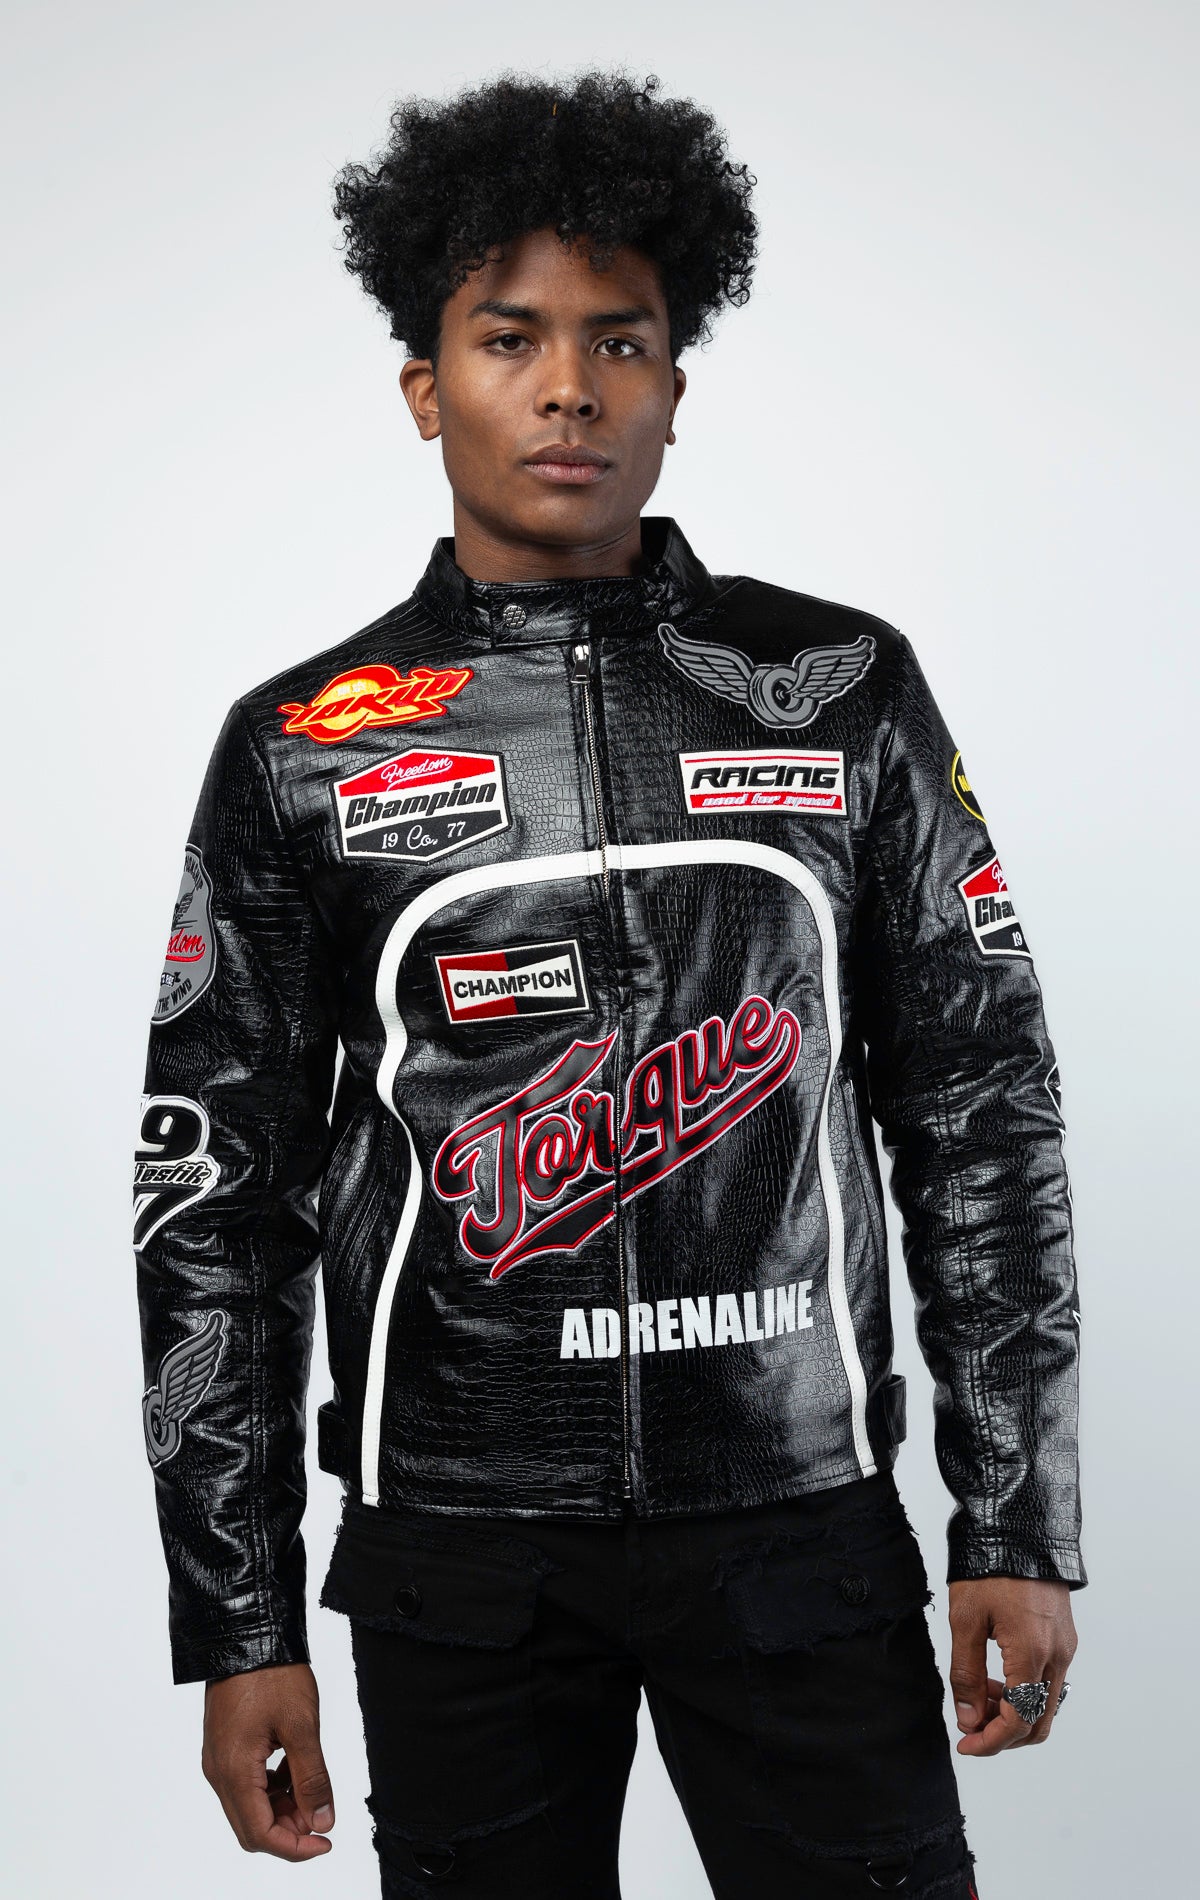 Black Leather motorcycle jacket featuring a bold "Speedster" graphic on the back. This varsity style jacket includes ribbed cuffs and collar, and a sleek silver zipper closure